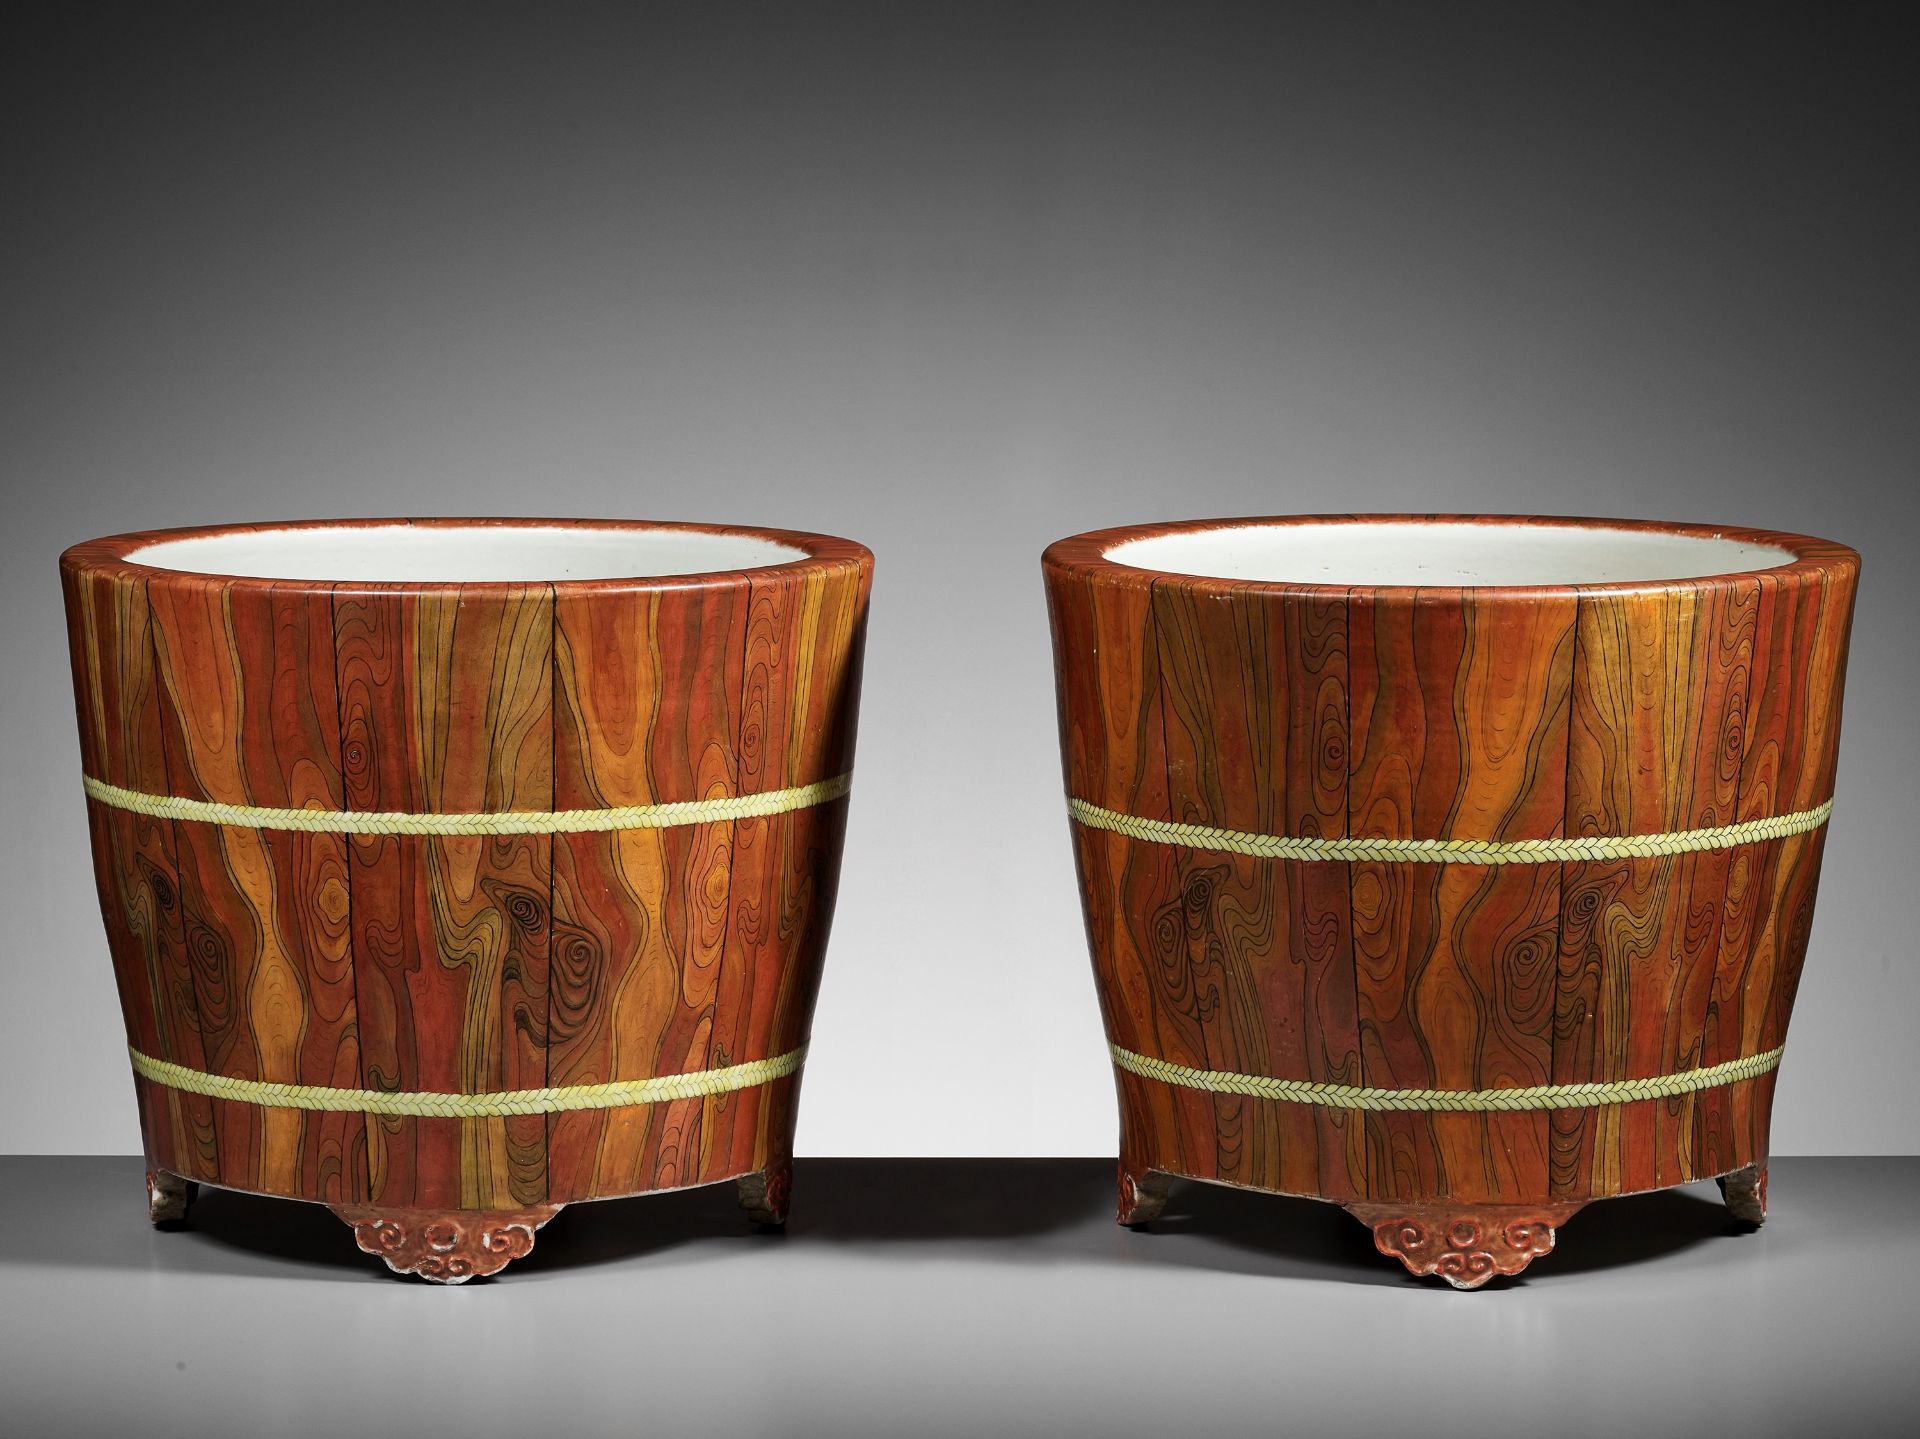 A PAIR LARGE 'FAUX-BOIS' JARDINIERES, QIANLONG MARKS AND PROBABLY OF THE PERIOD (circa 1736-1795)